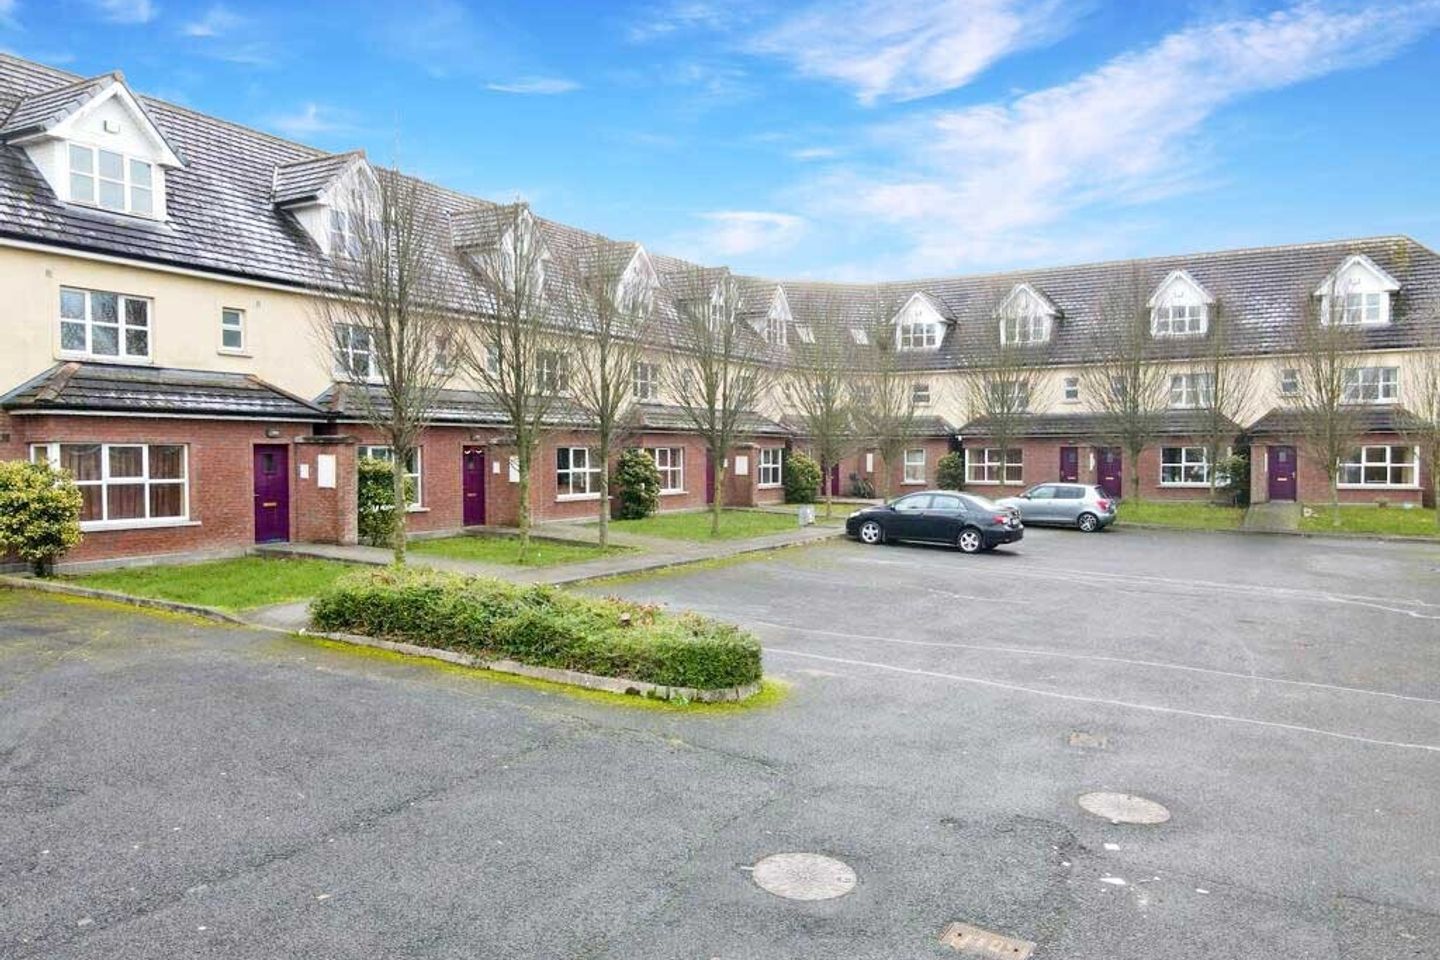 16-25 The Lodges, Dublin Road, Nenagh, Co. Tipperary